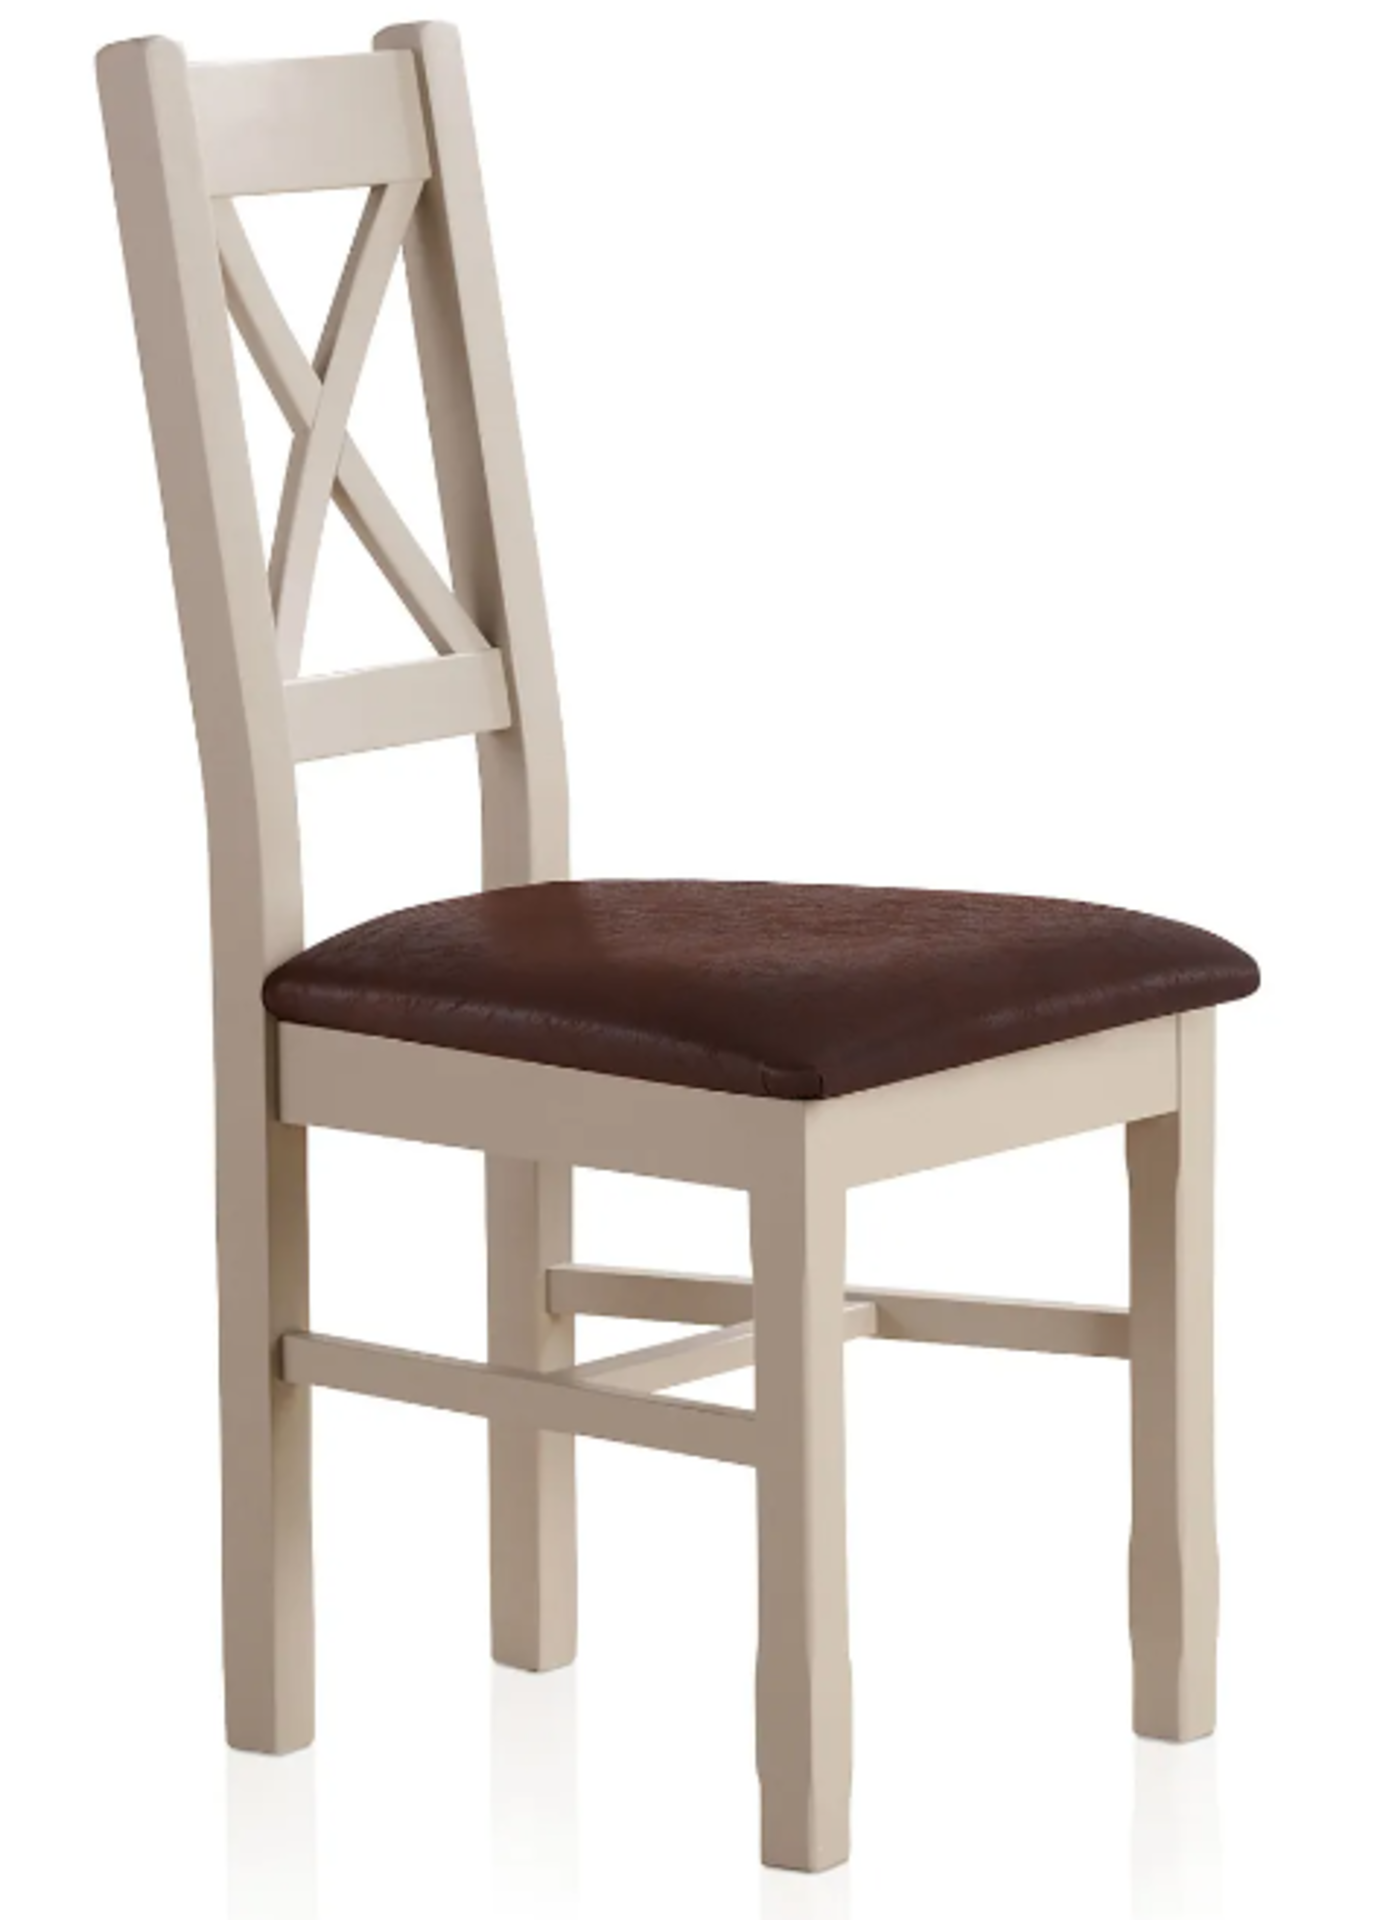 Pair of KEMBLE Painted Solid Hardwood Dining Chair. RRP £195.00. *no seat pad*. Match any table,